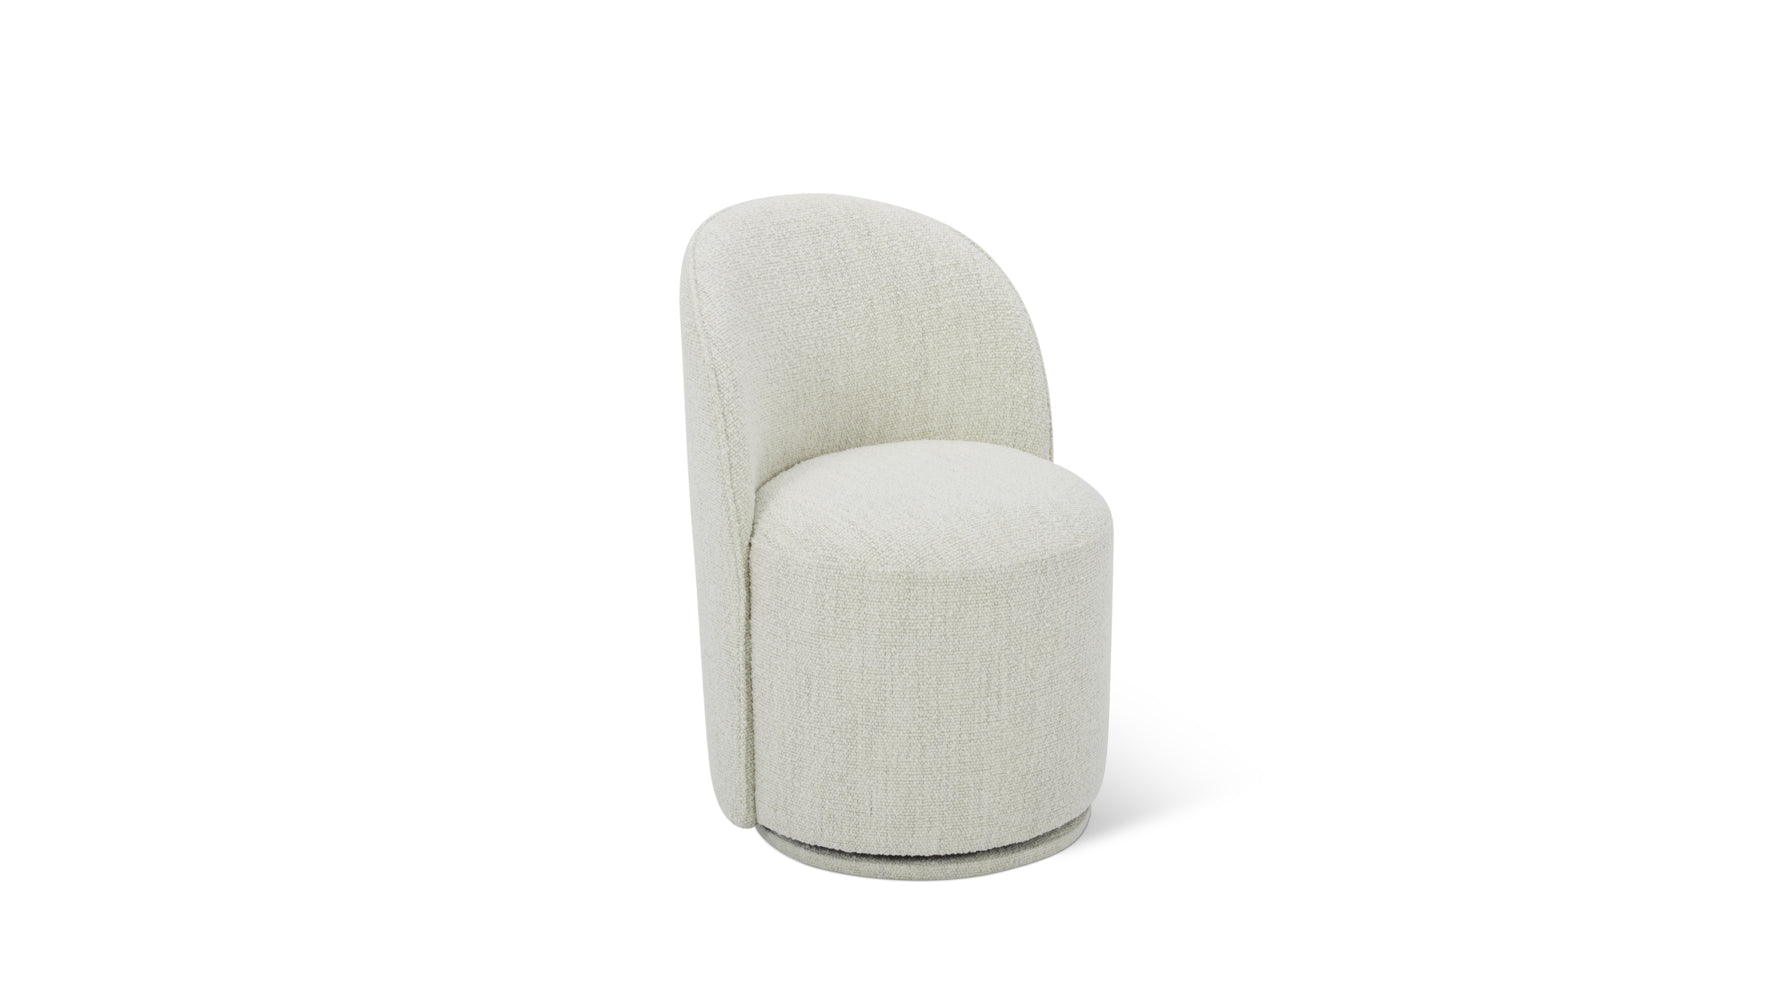 Dialed In Swivel Dining Chair, Sea Pearl - Image 1